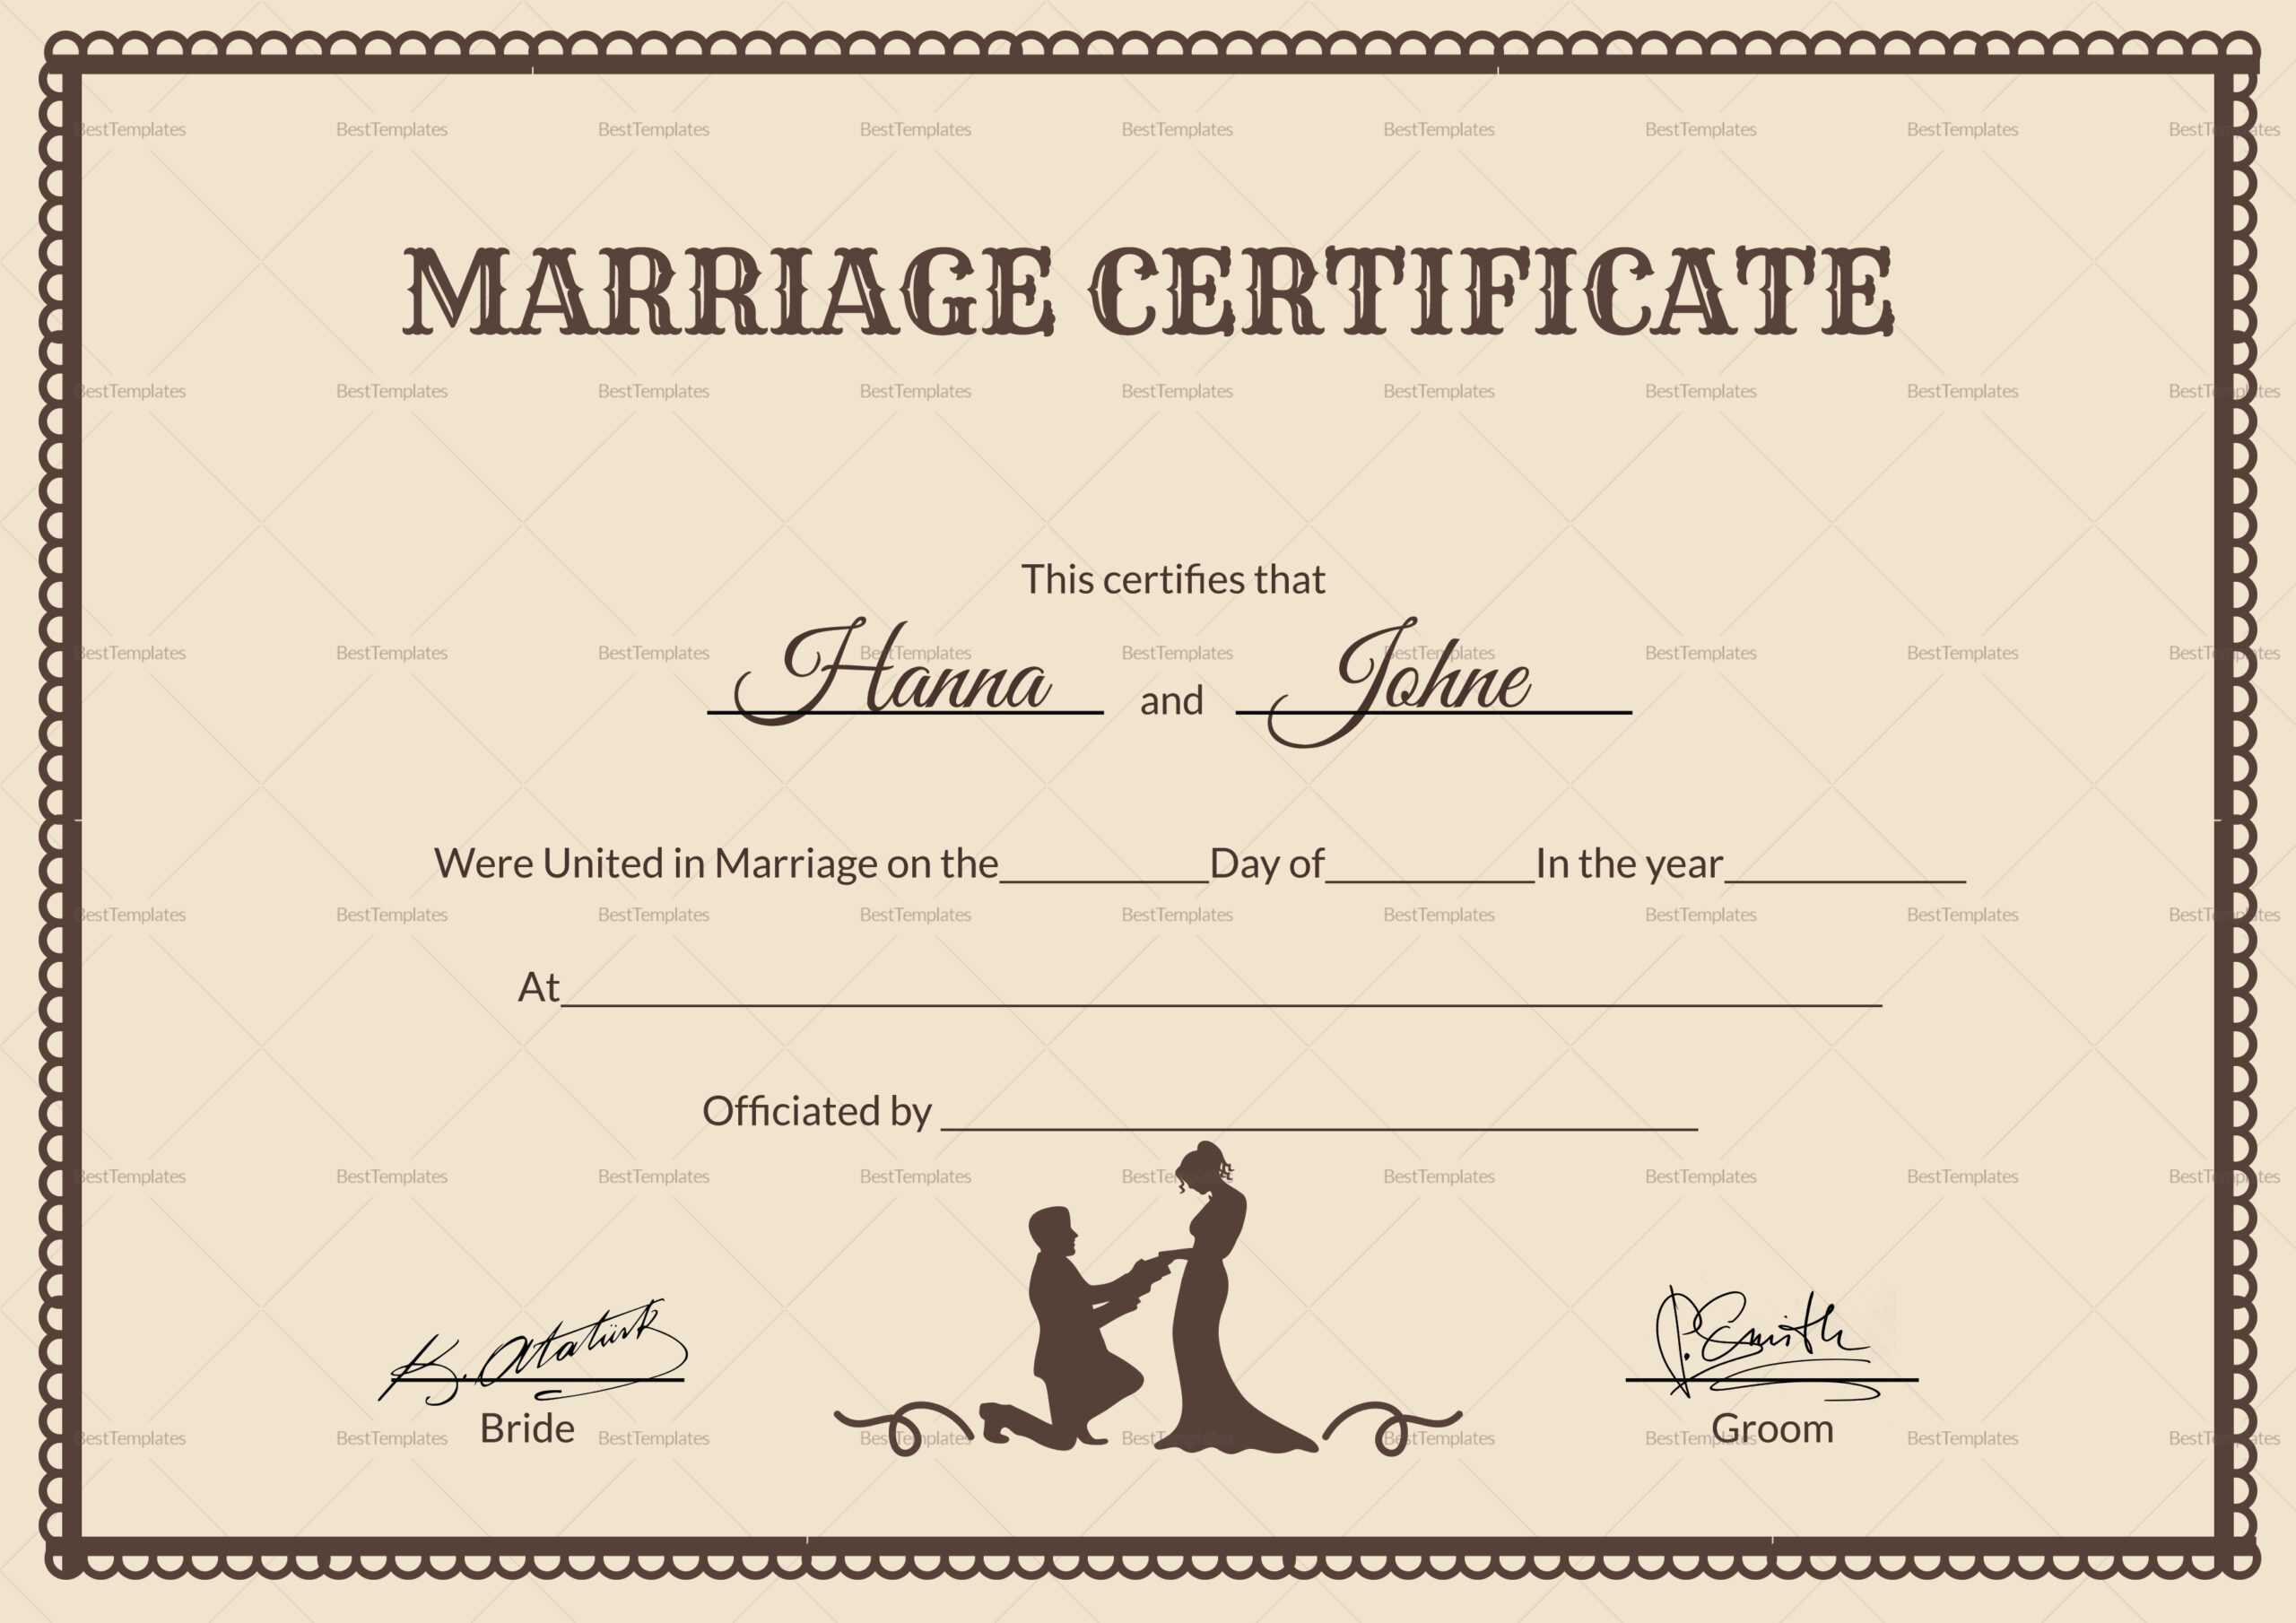 Vintage Marriage Certificate Template For Certificate Of Marriage Template